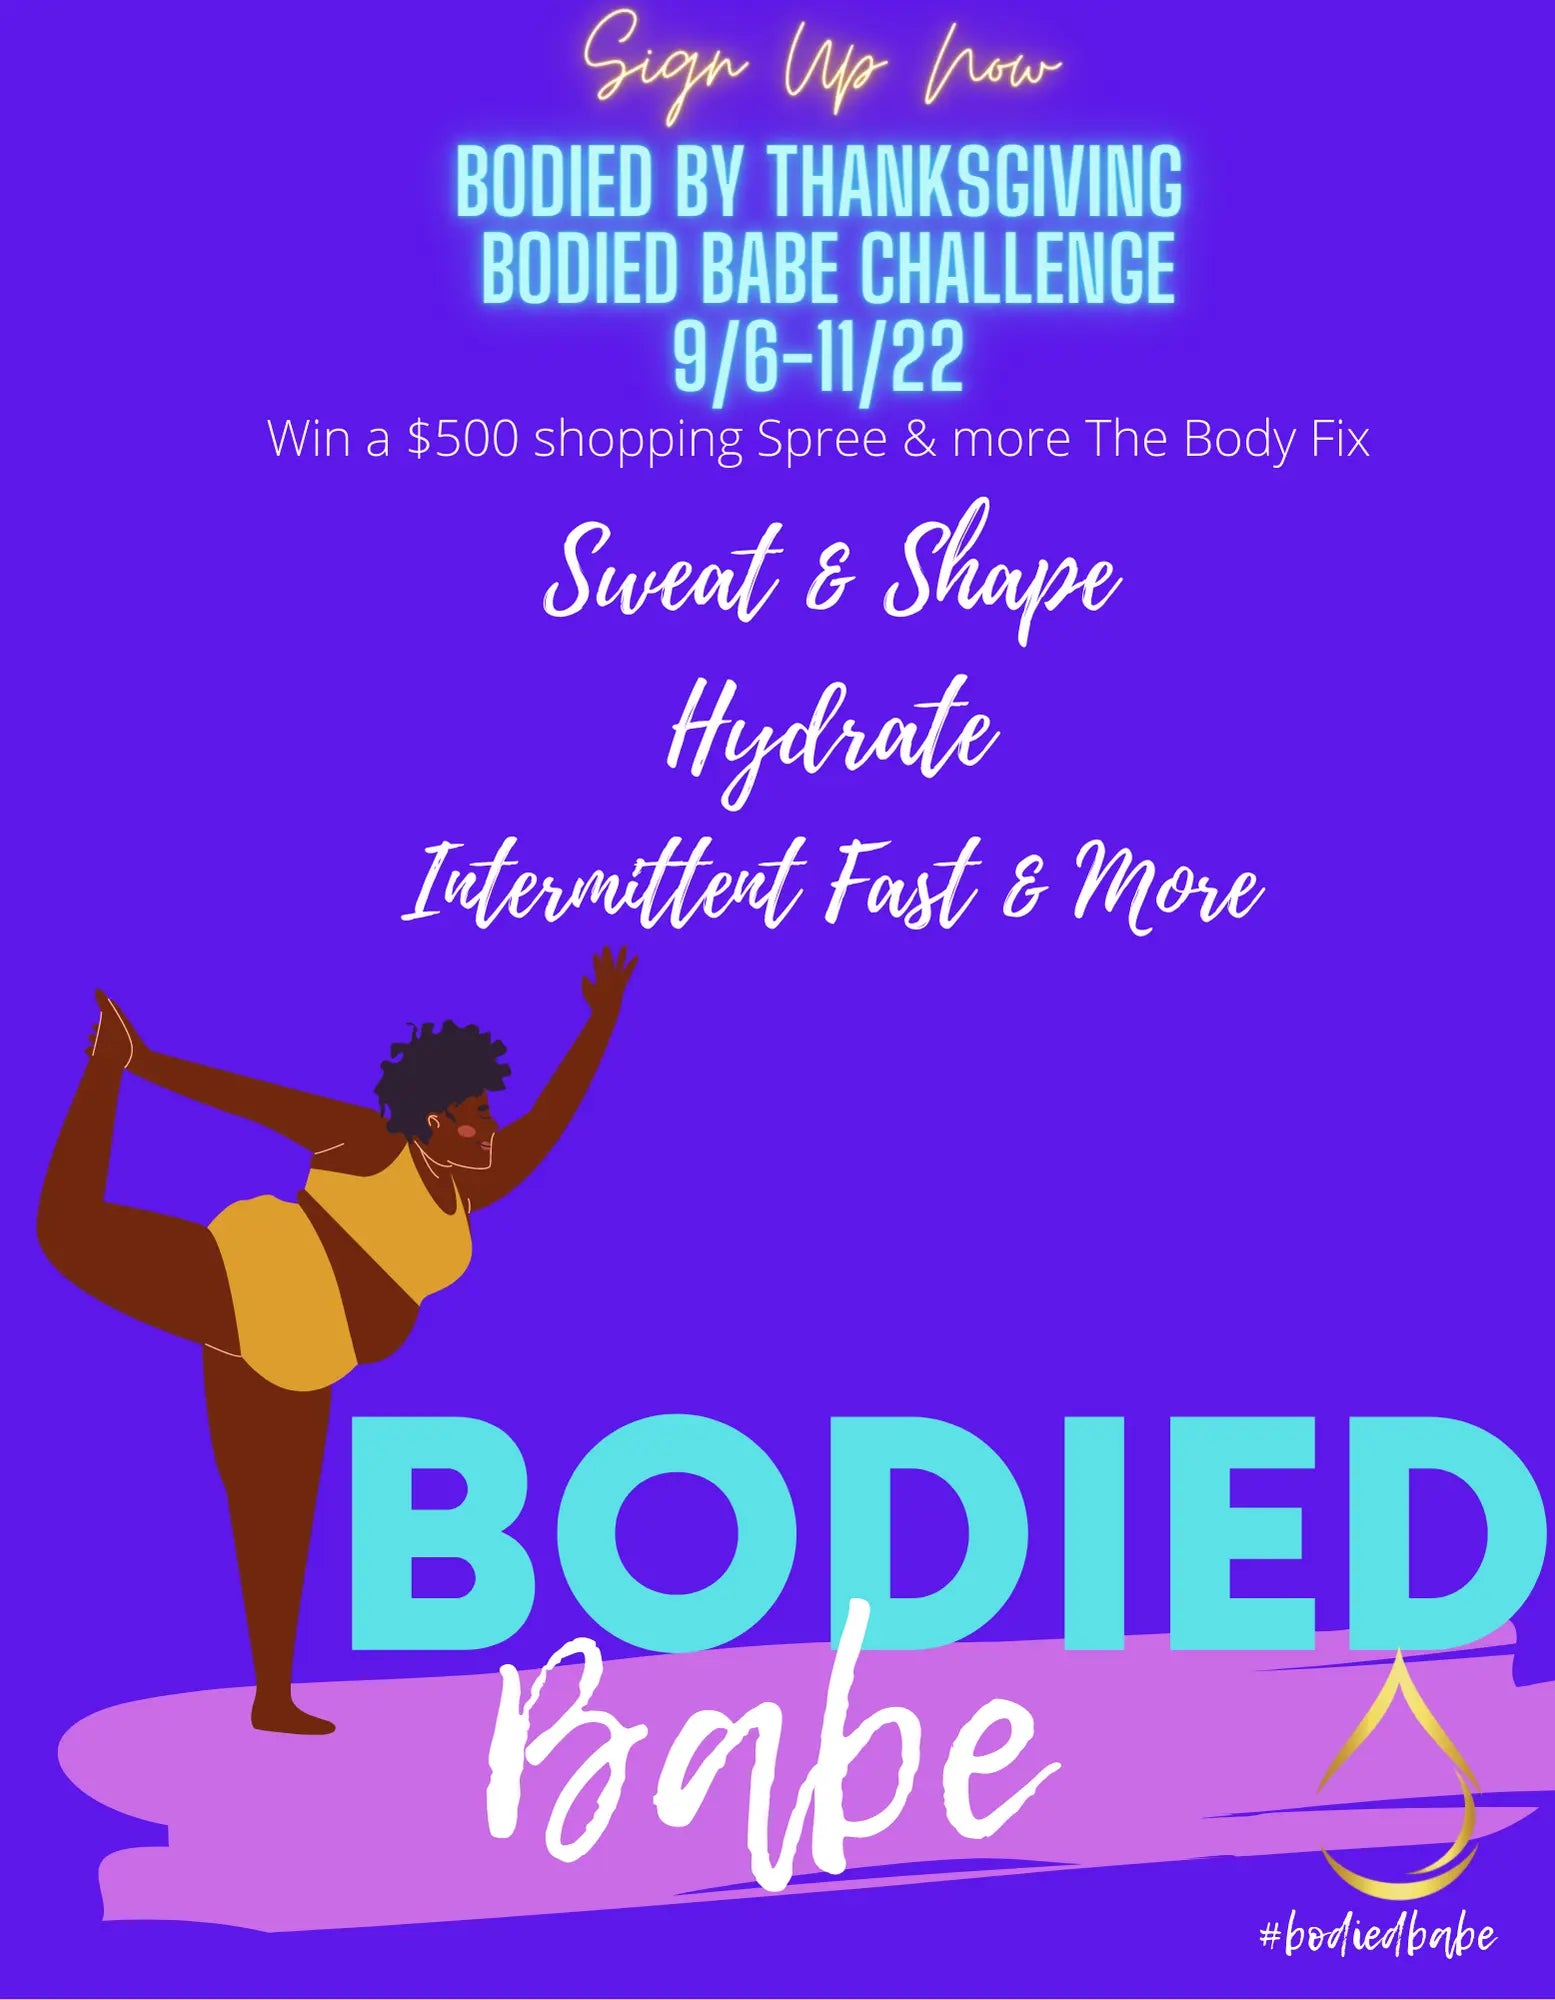 Join Our Bodied By Thanksgiving Challenge! Win $500 shopping Spree at The Body Fix! - THE BODY FIX